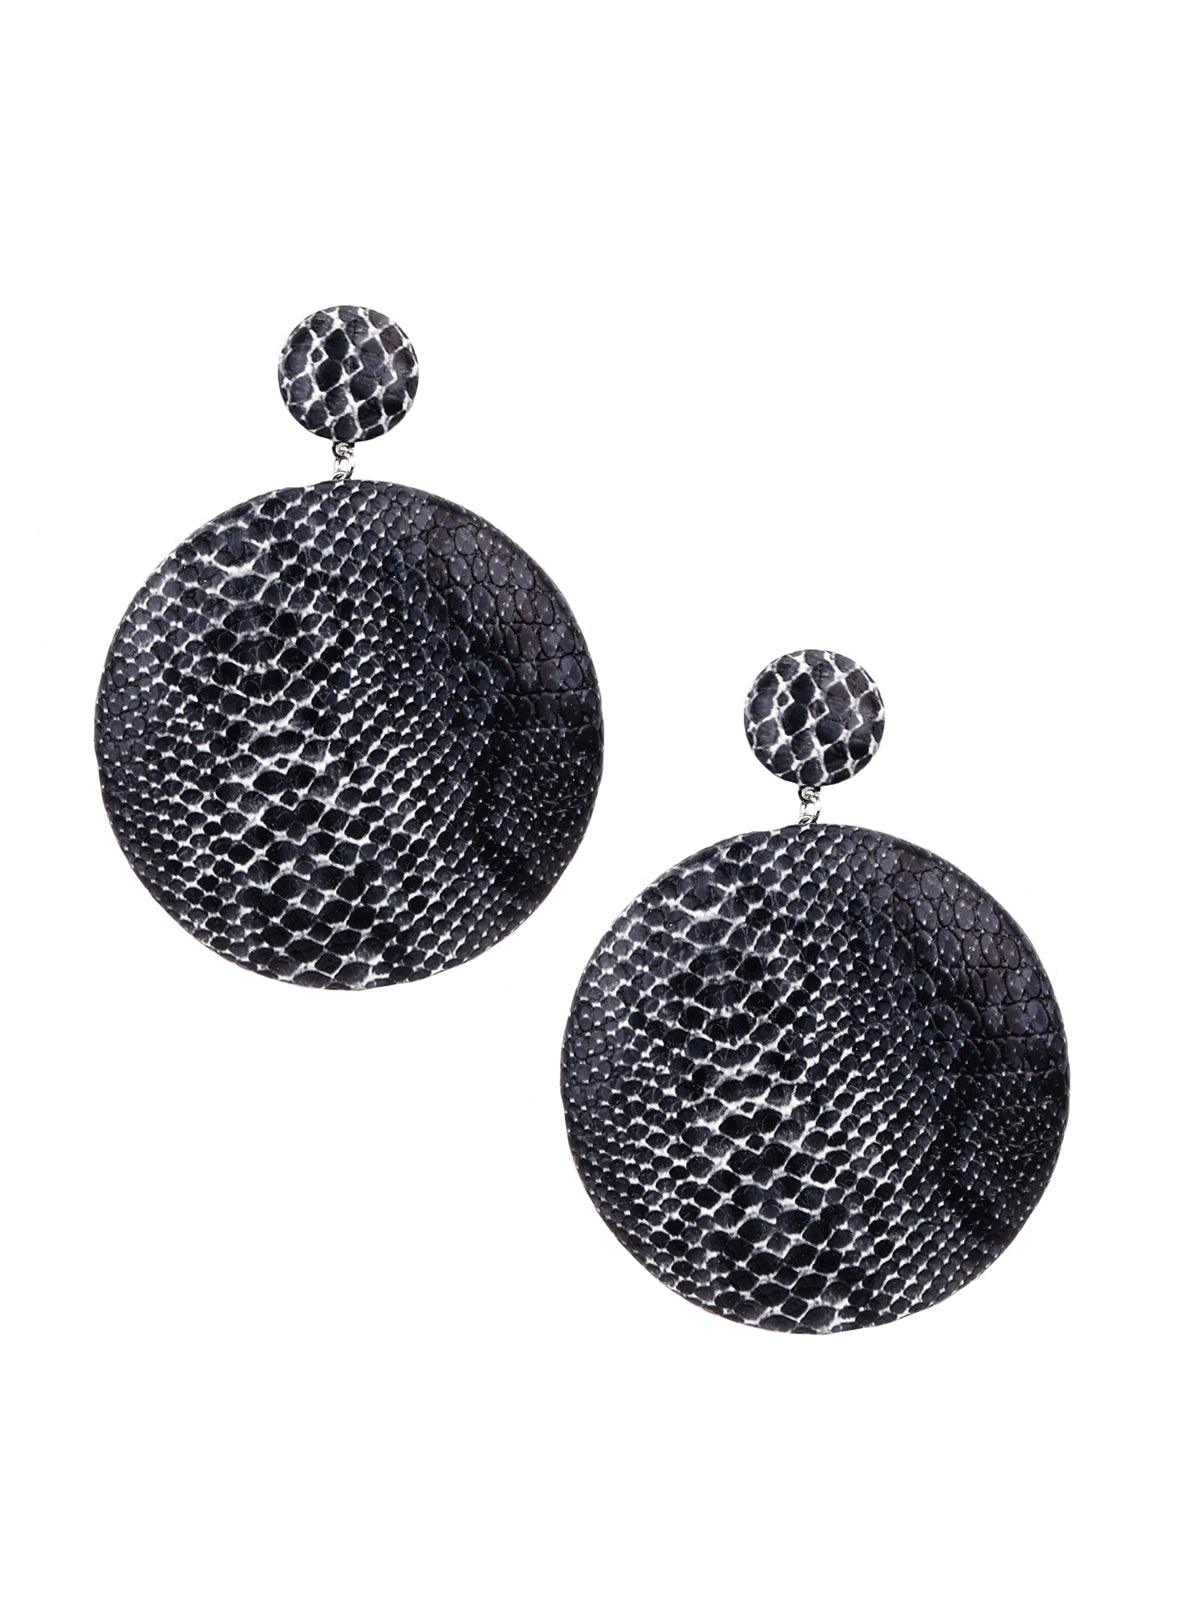 Exquisite black and white croc printed rounded earrings - Odette